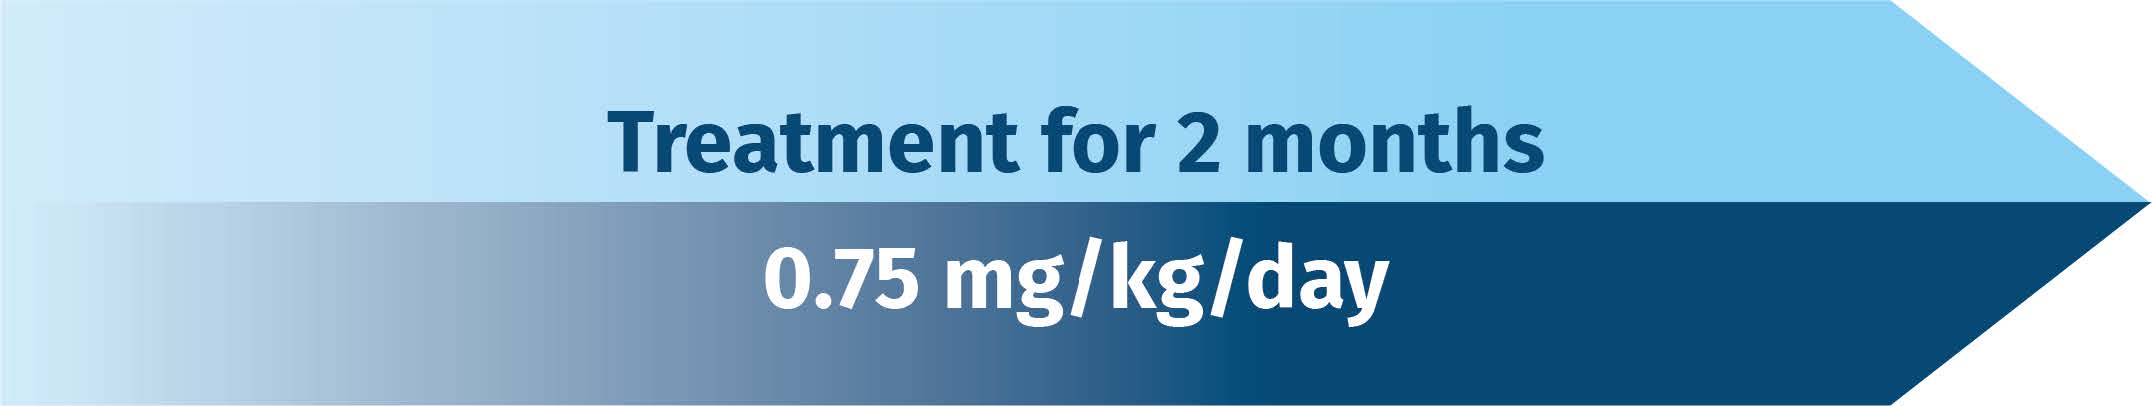 Treatment for 2 months .75 mg/kg/day